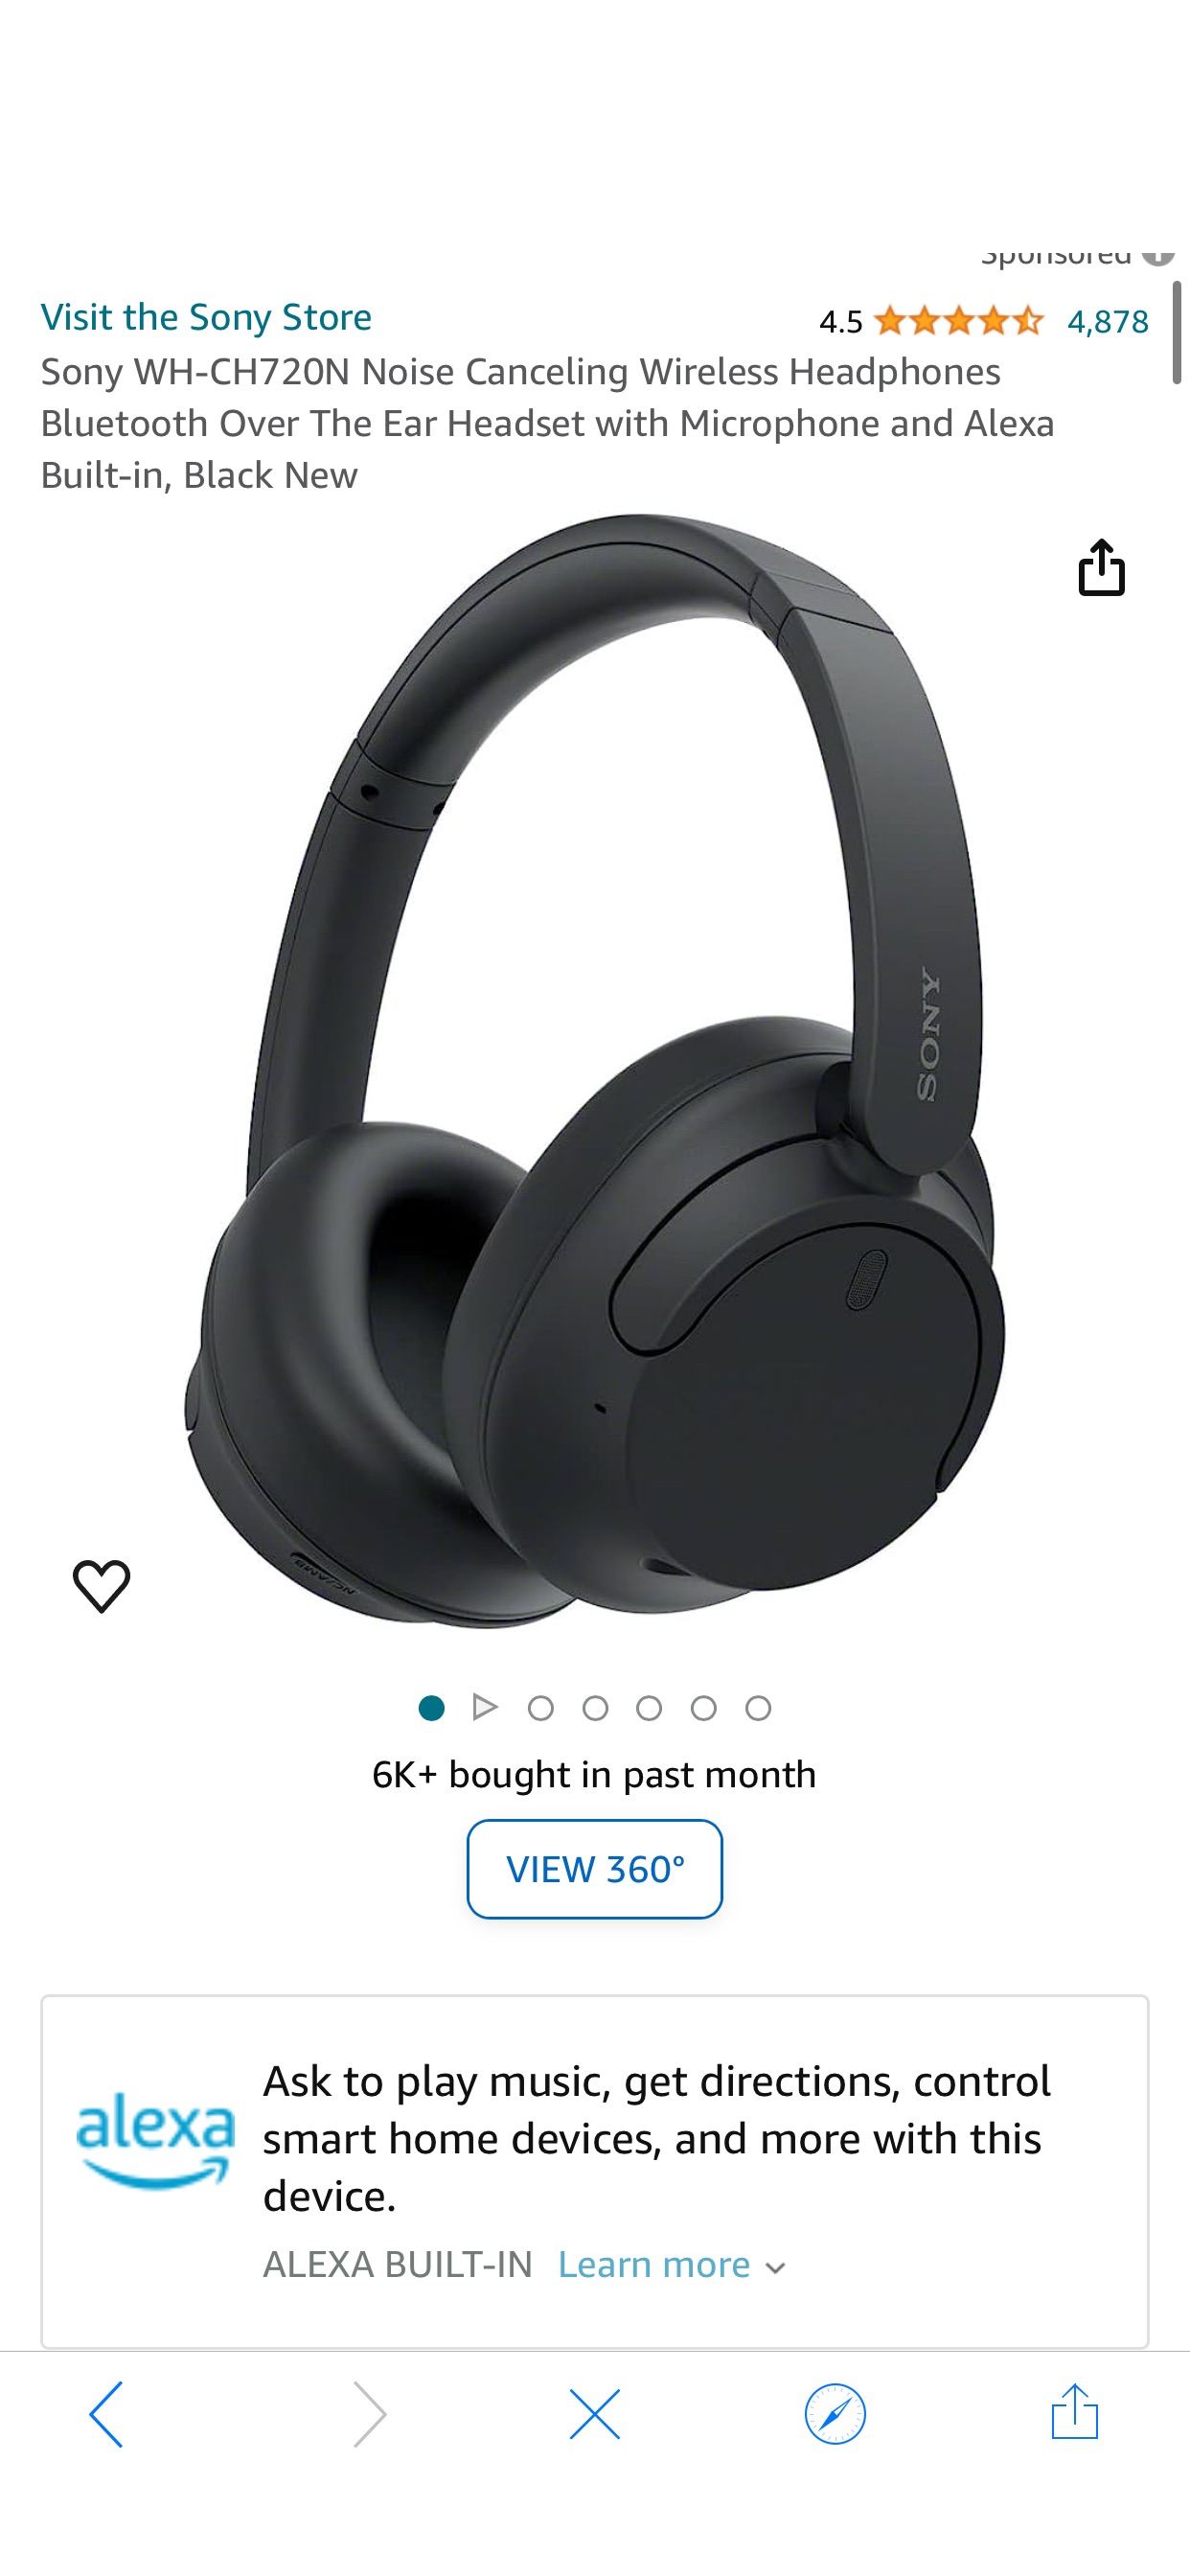 Amazon.com: Sony WH-CH720N Noise Canceling Wireless Headphones Bluetooth Over The Ear Headset with Microphone and Alexa Built-in, Black New : Electronics 索尼降噪耳机